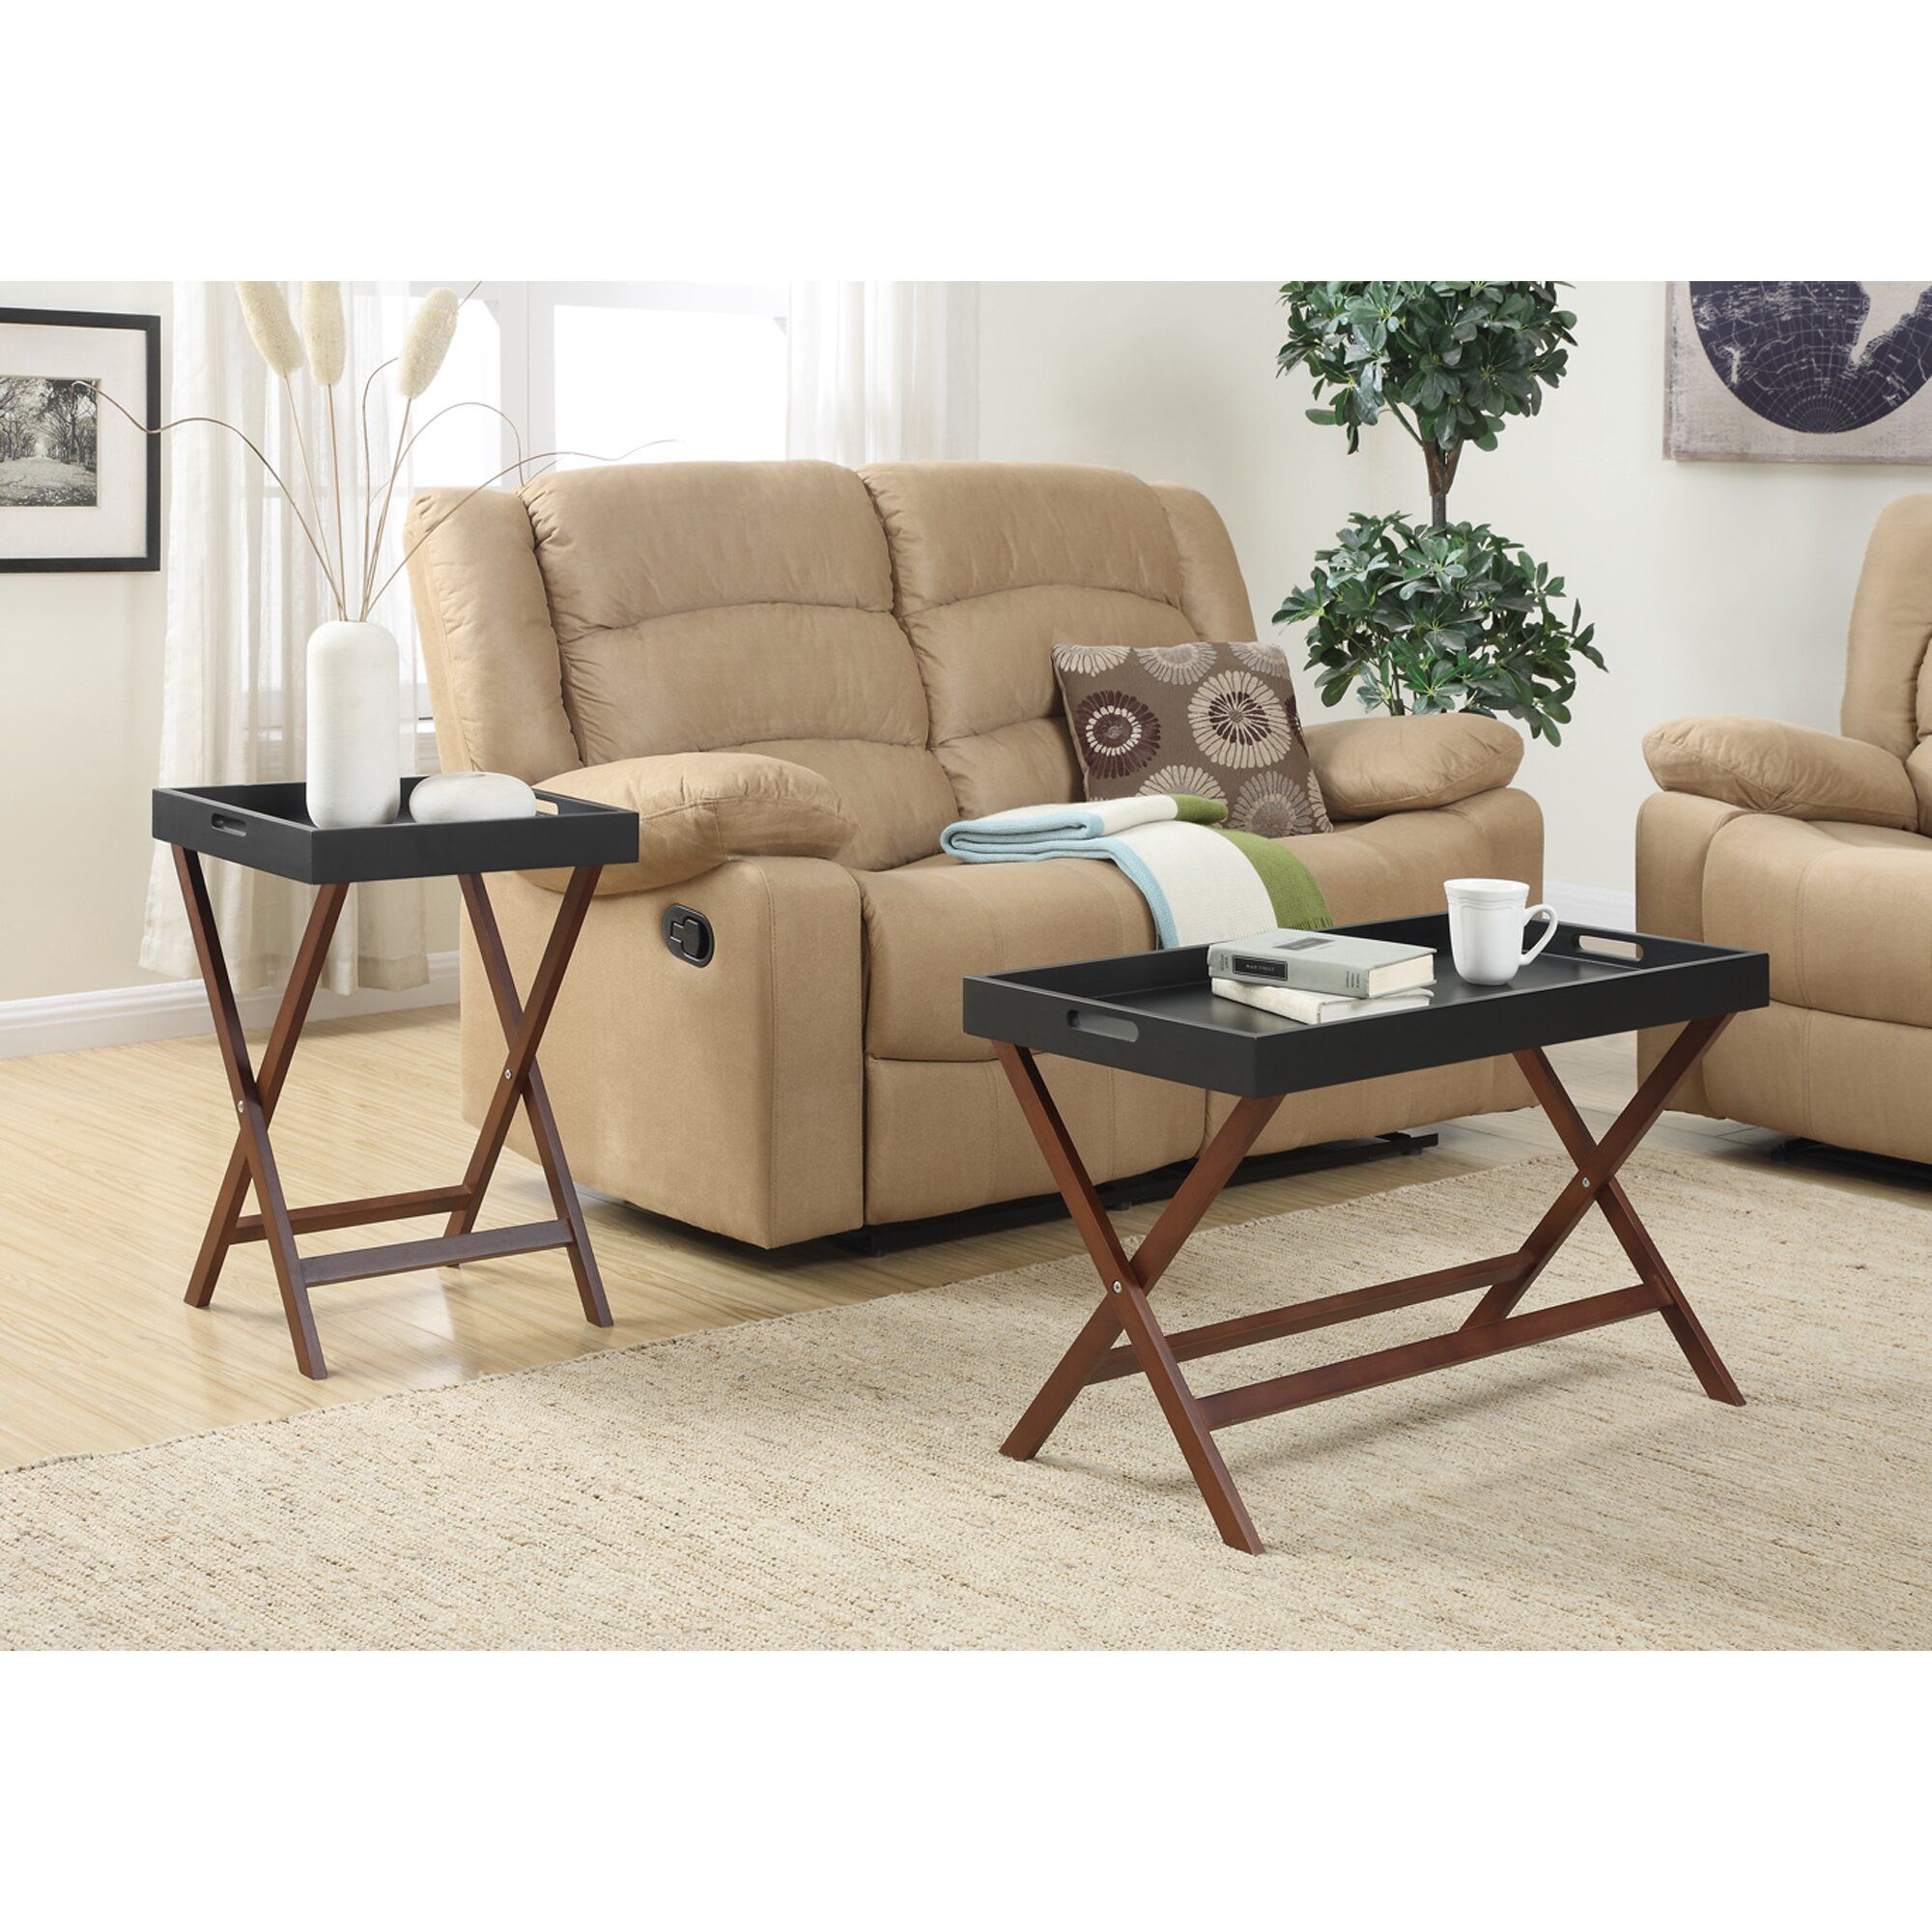 Lockheart Coffee Table With Removable Tray | Wayfair Intended For Detachable Tray Coffee Tables (Gallery 3 of 20)